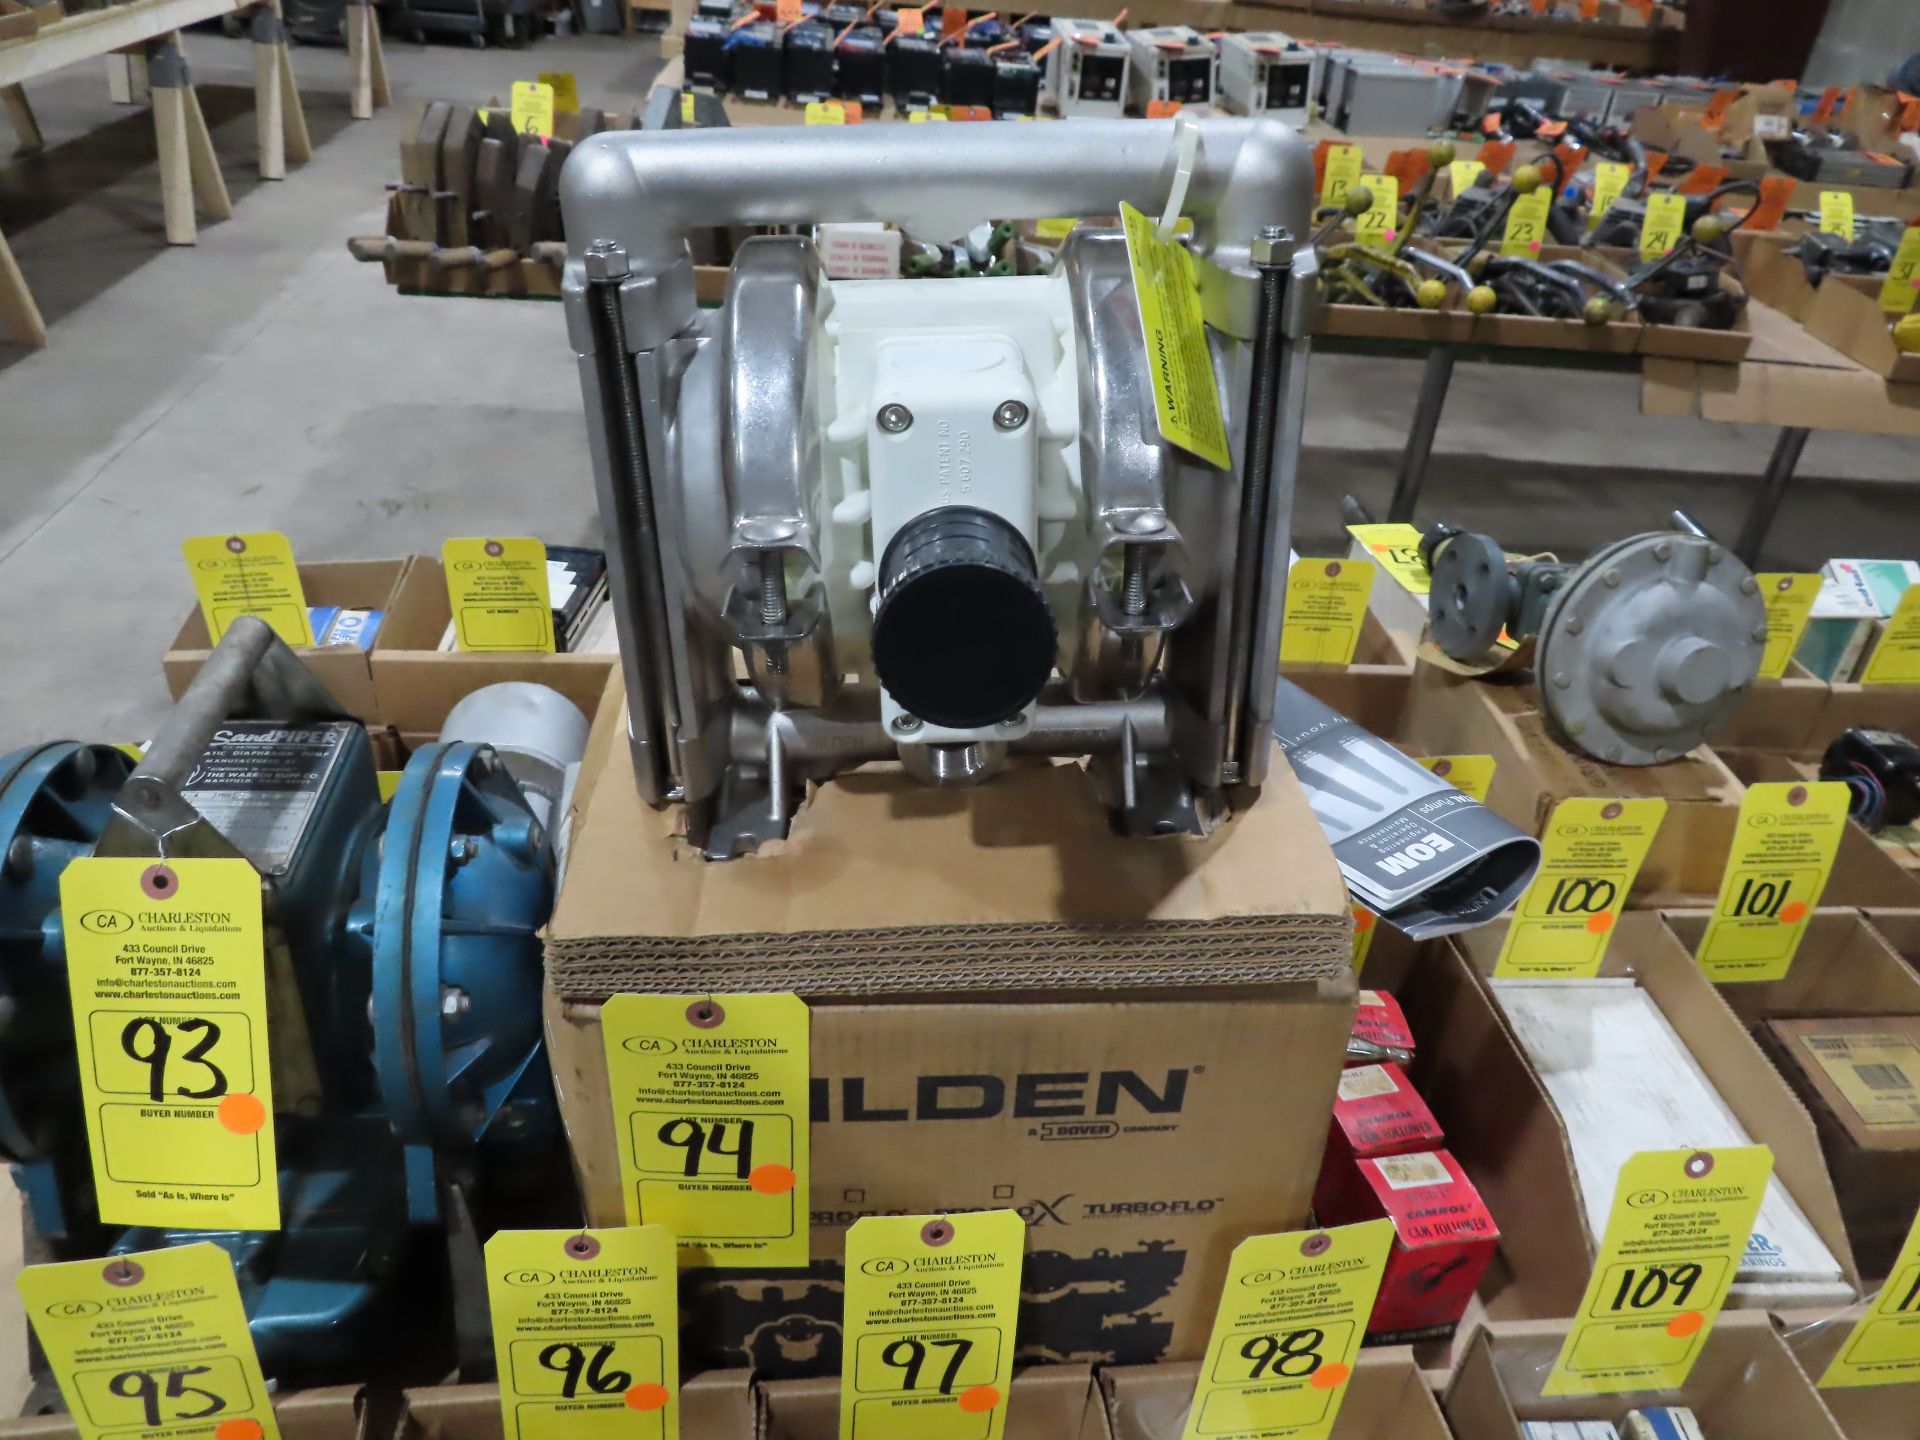 Wilden pump model P2/SSPPP/NEW/NE/SBN/2000, new in box, as always with Brolyn LLC auctions, all lots